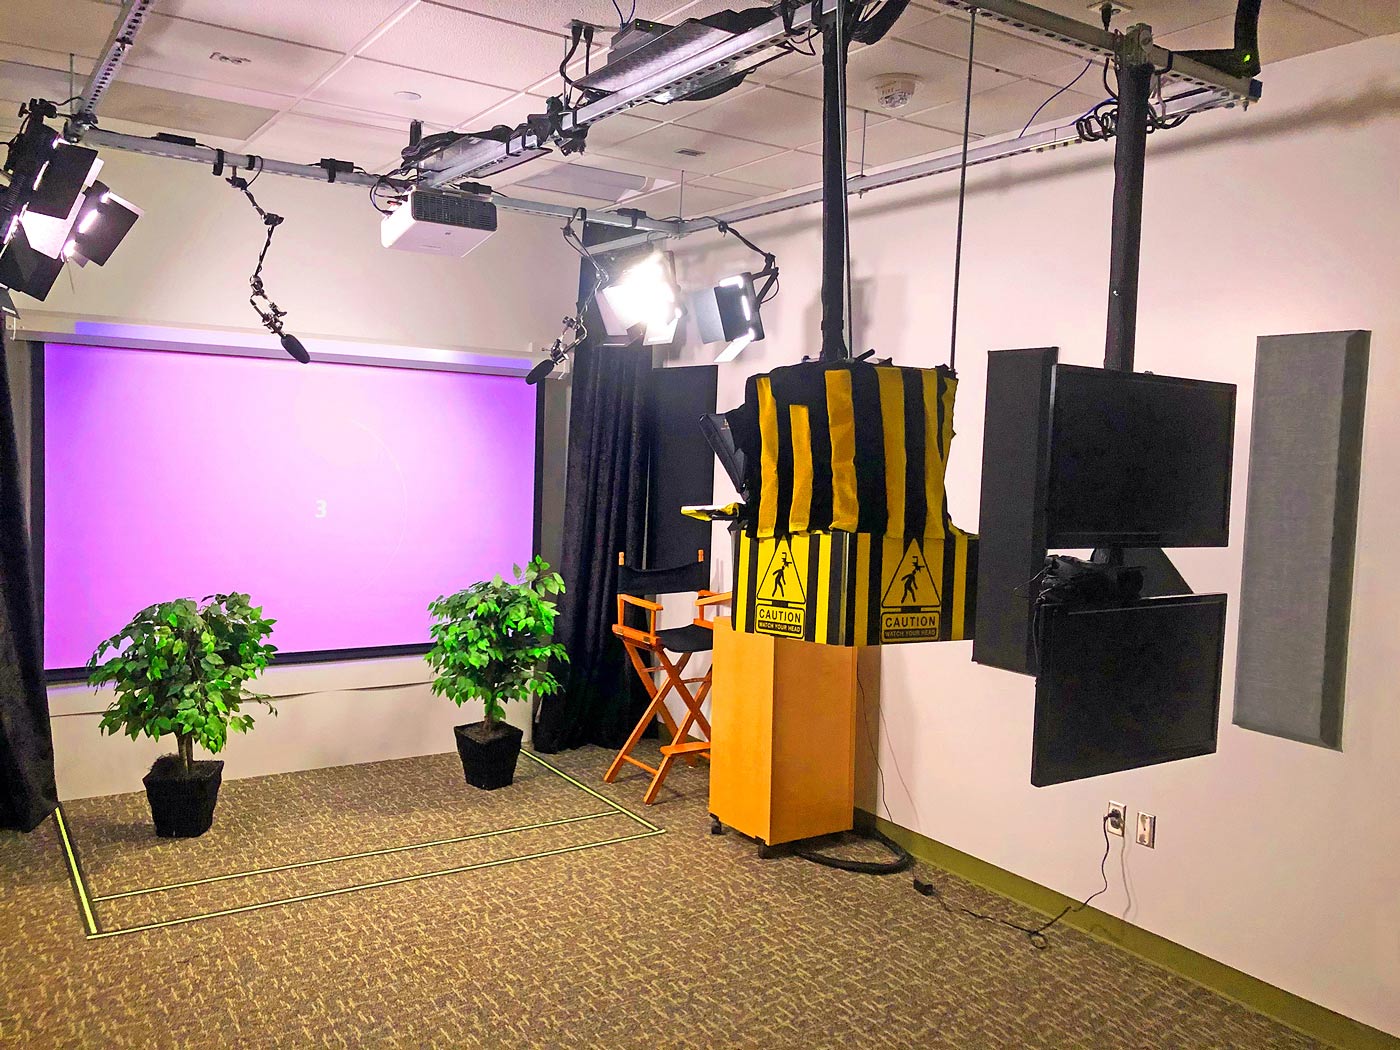 The Video Recording Room with curtains opened to reveal projection screen lowered and stage lights on, ready to record a presentation session. The configuration shown here is for a Green Screen Mode recording session. 